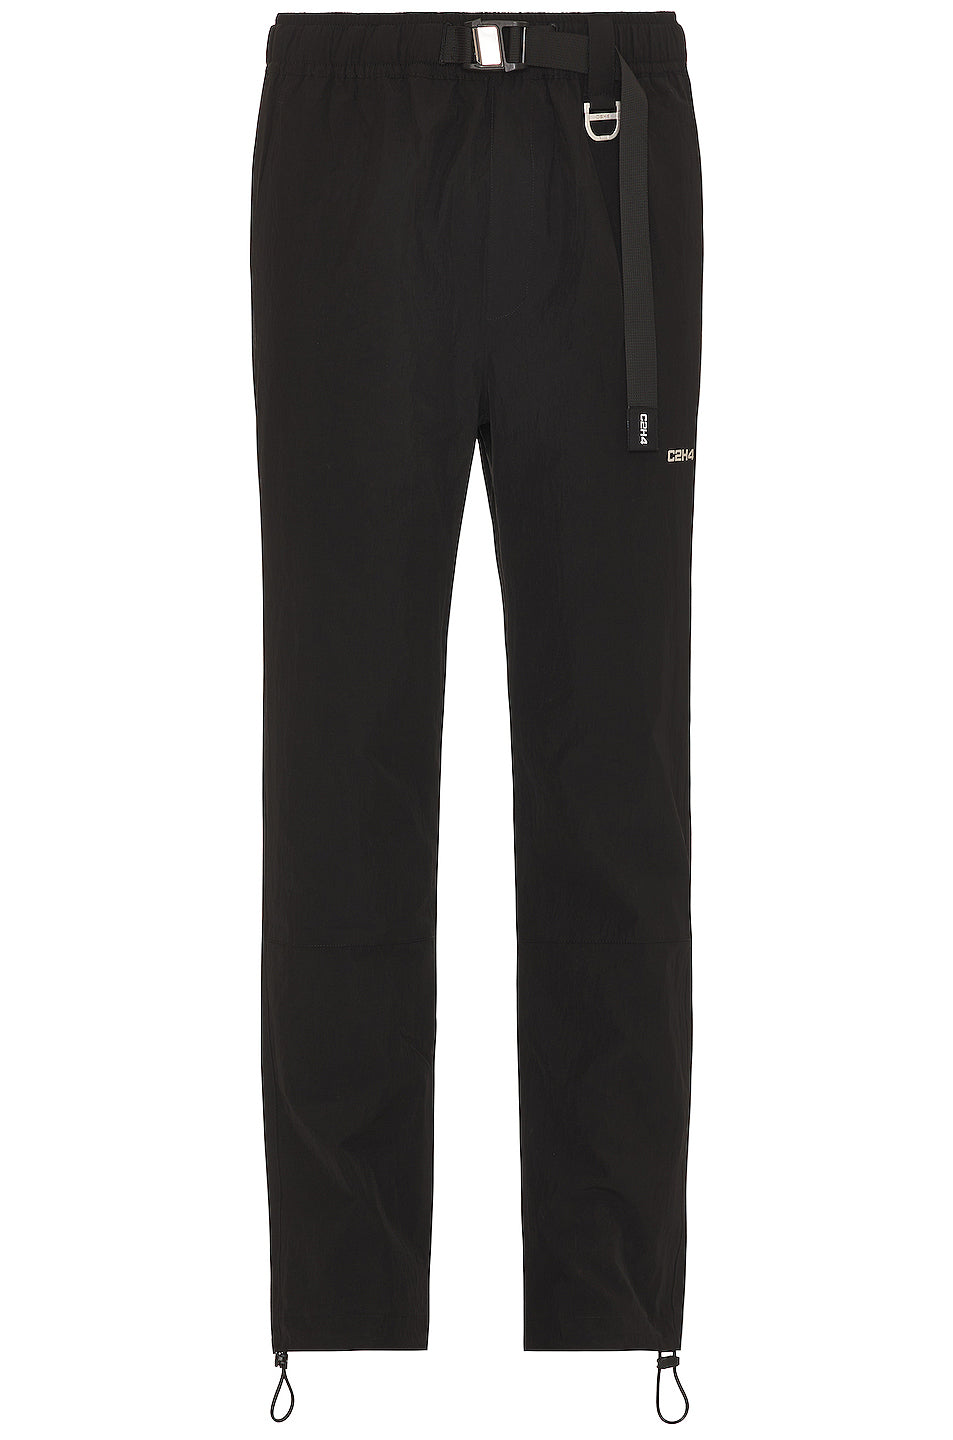 Stai Buckle Track Pants